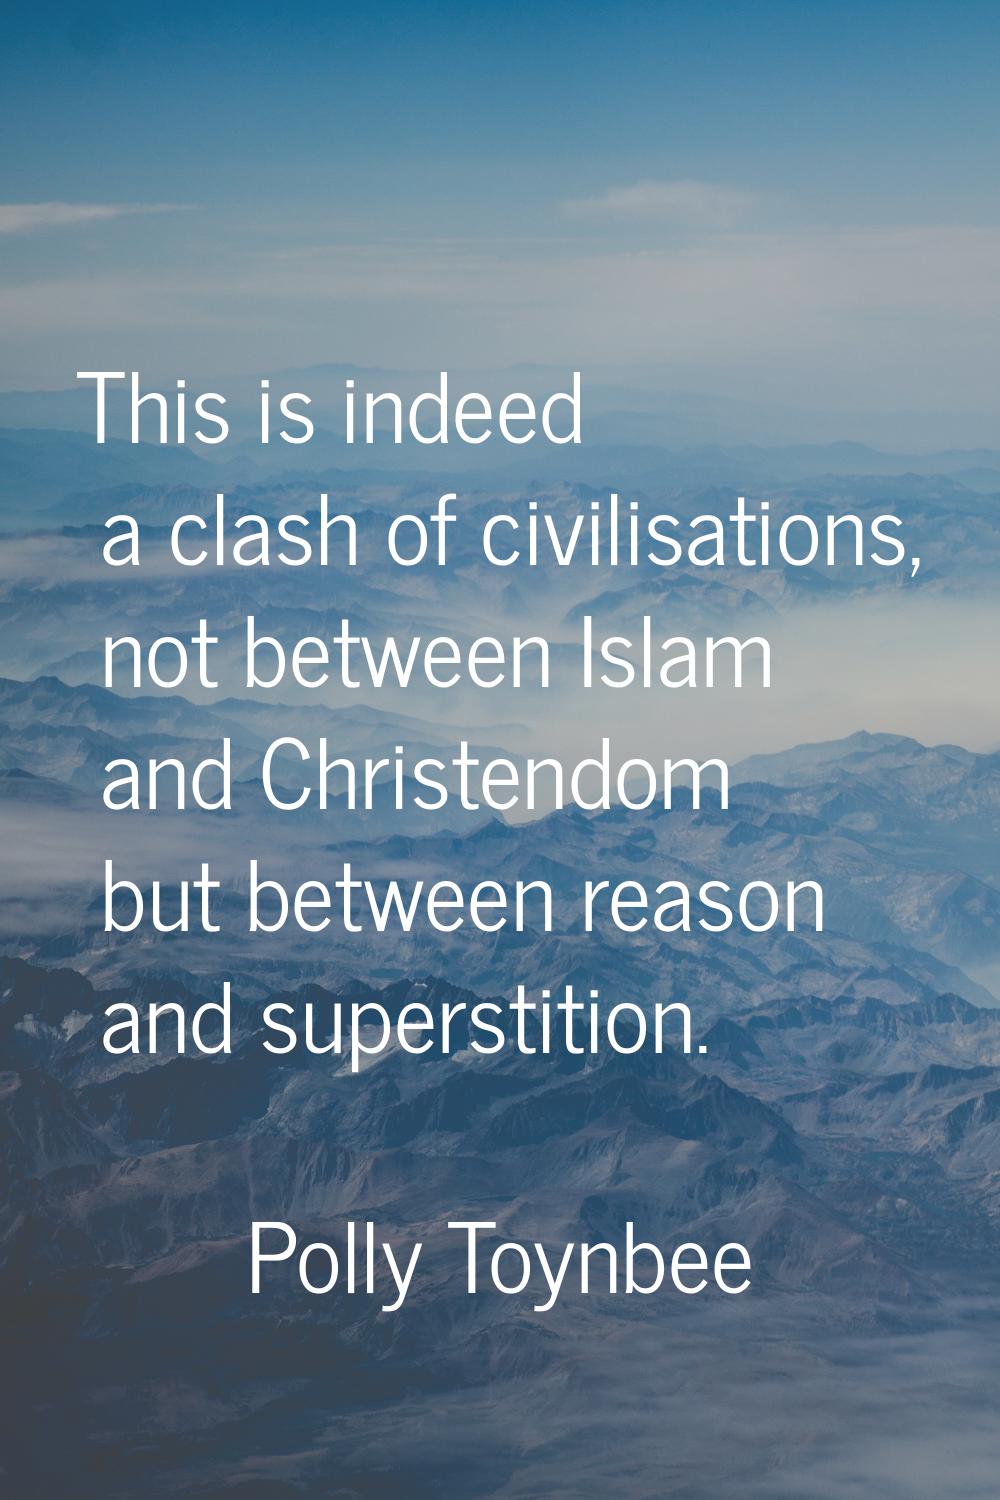 This is indeed a clash of civilisations, not between Islam and Christendom but between reason and s